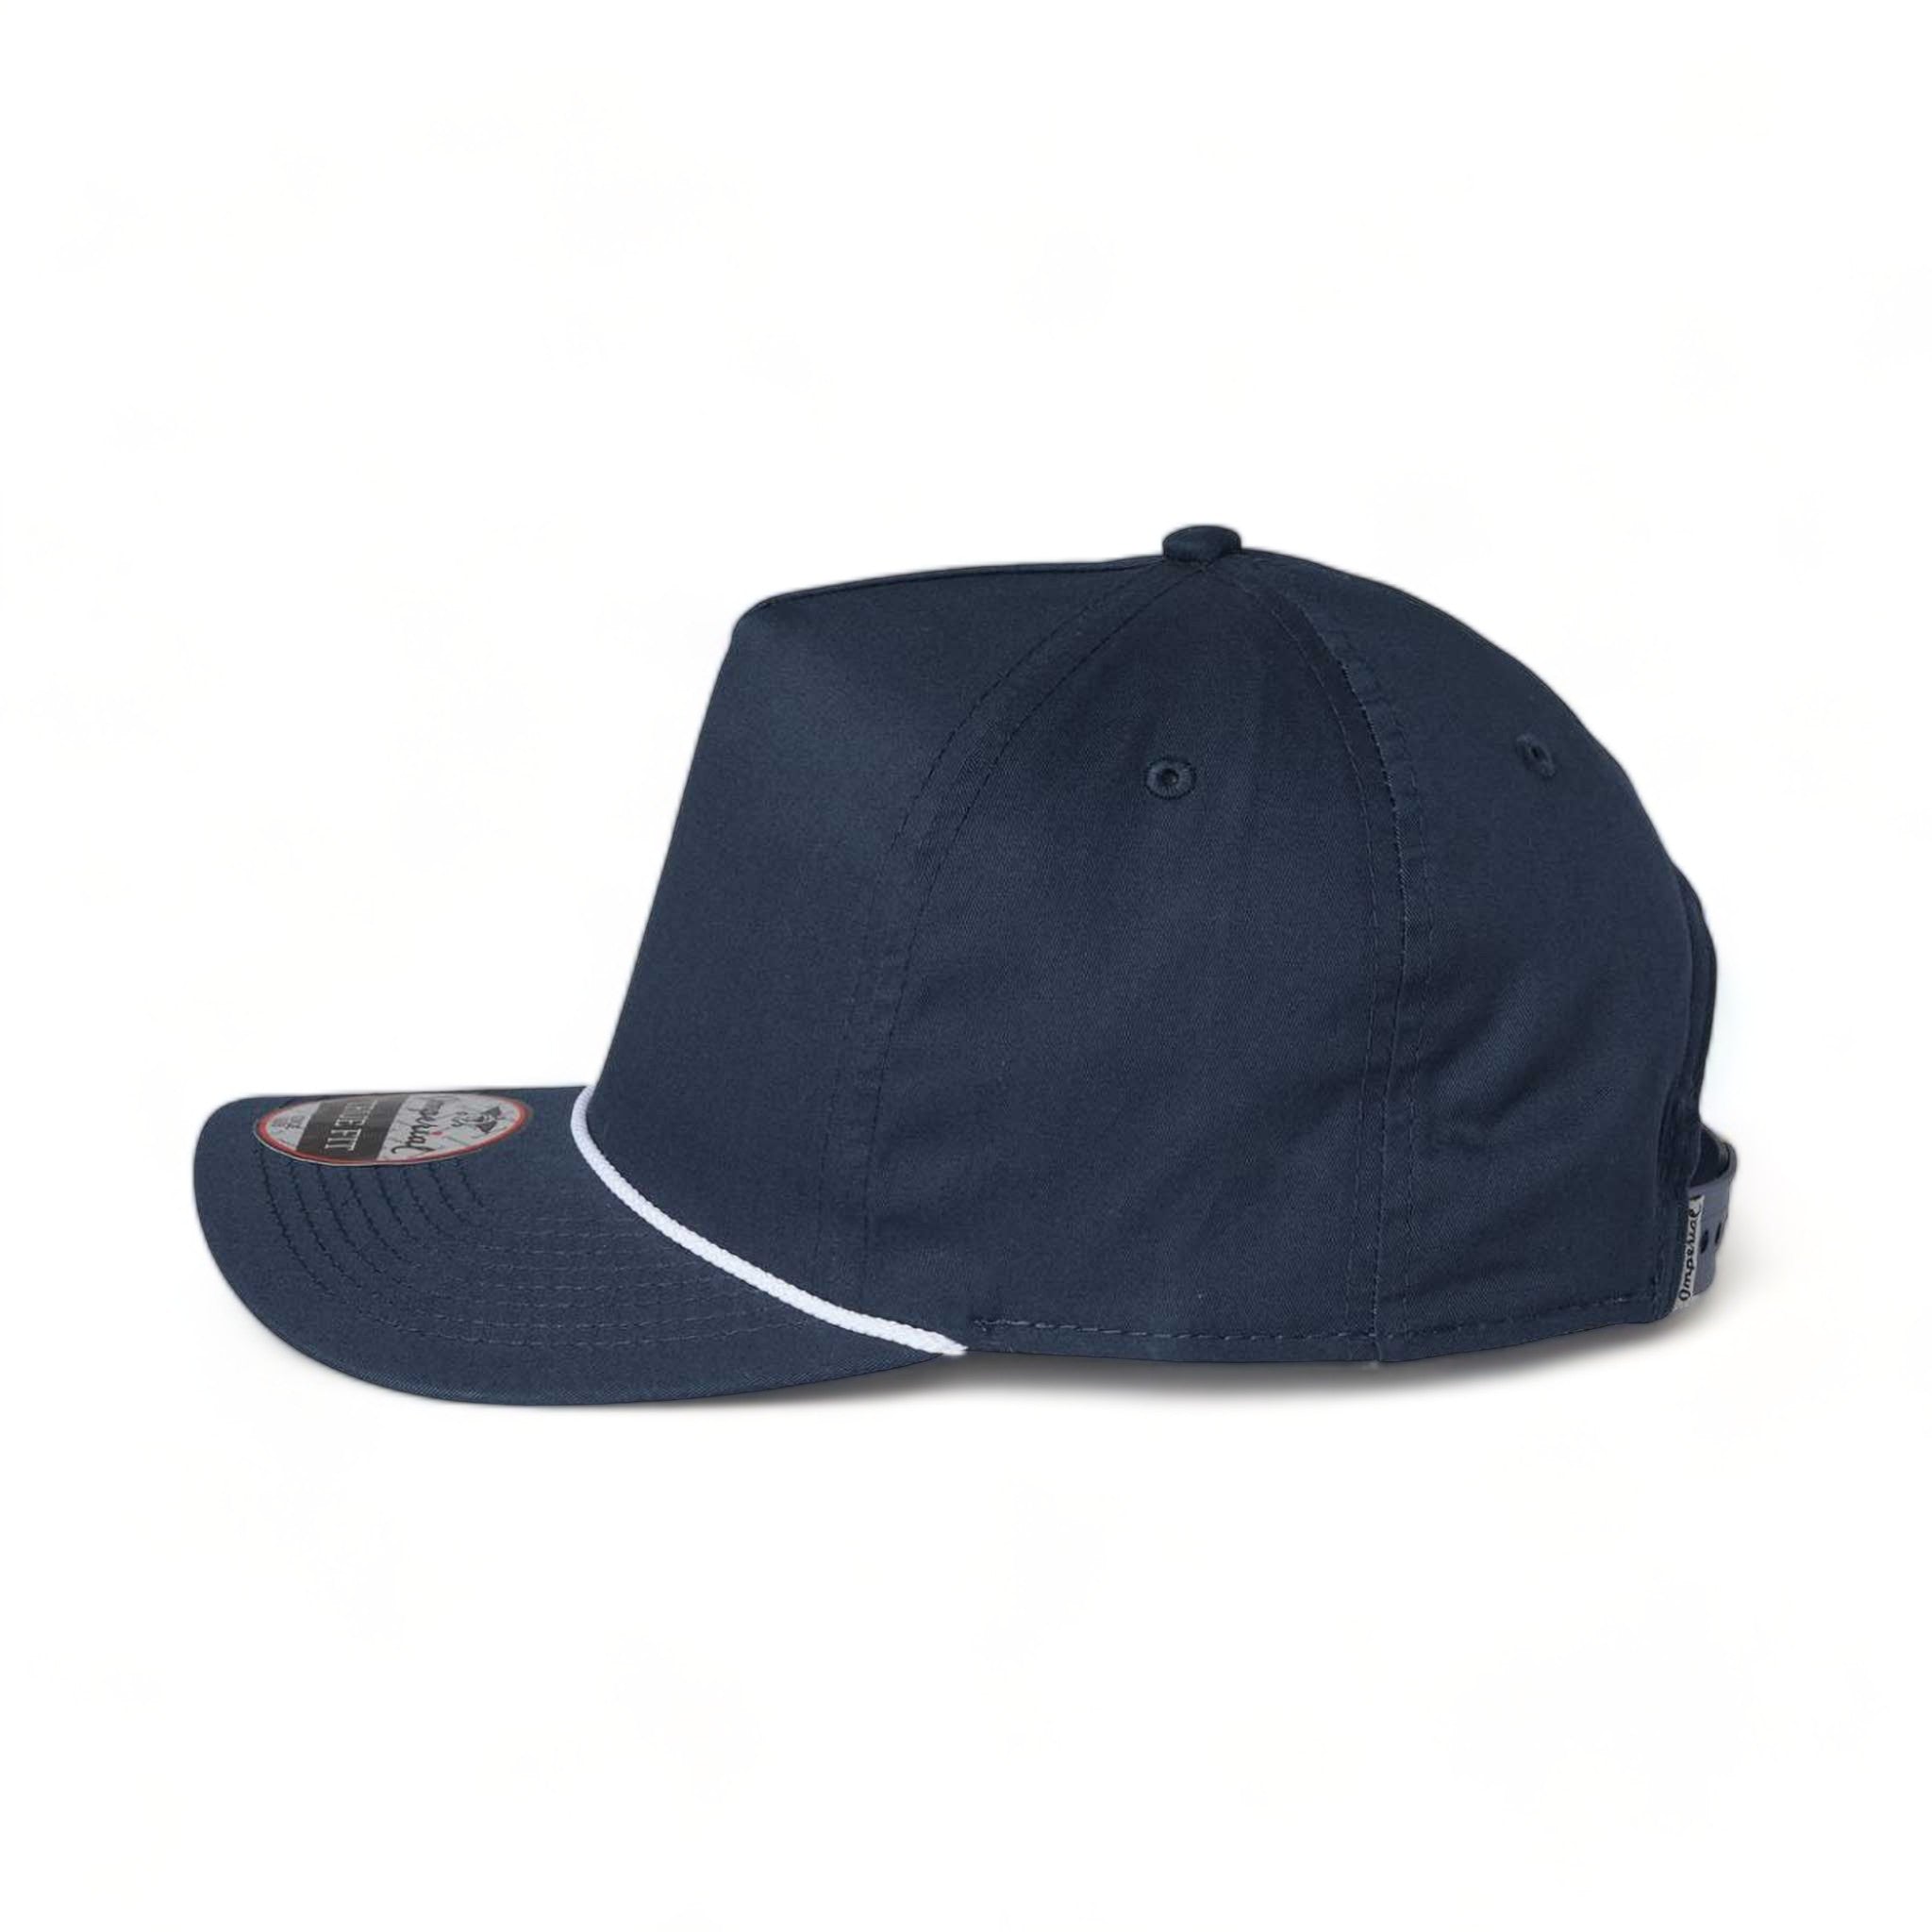 Side view of Imperial 5056 custom hat in navy and white